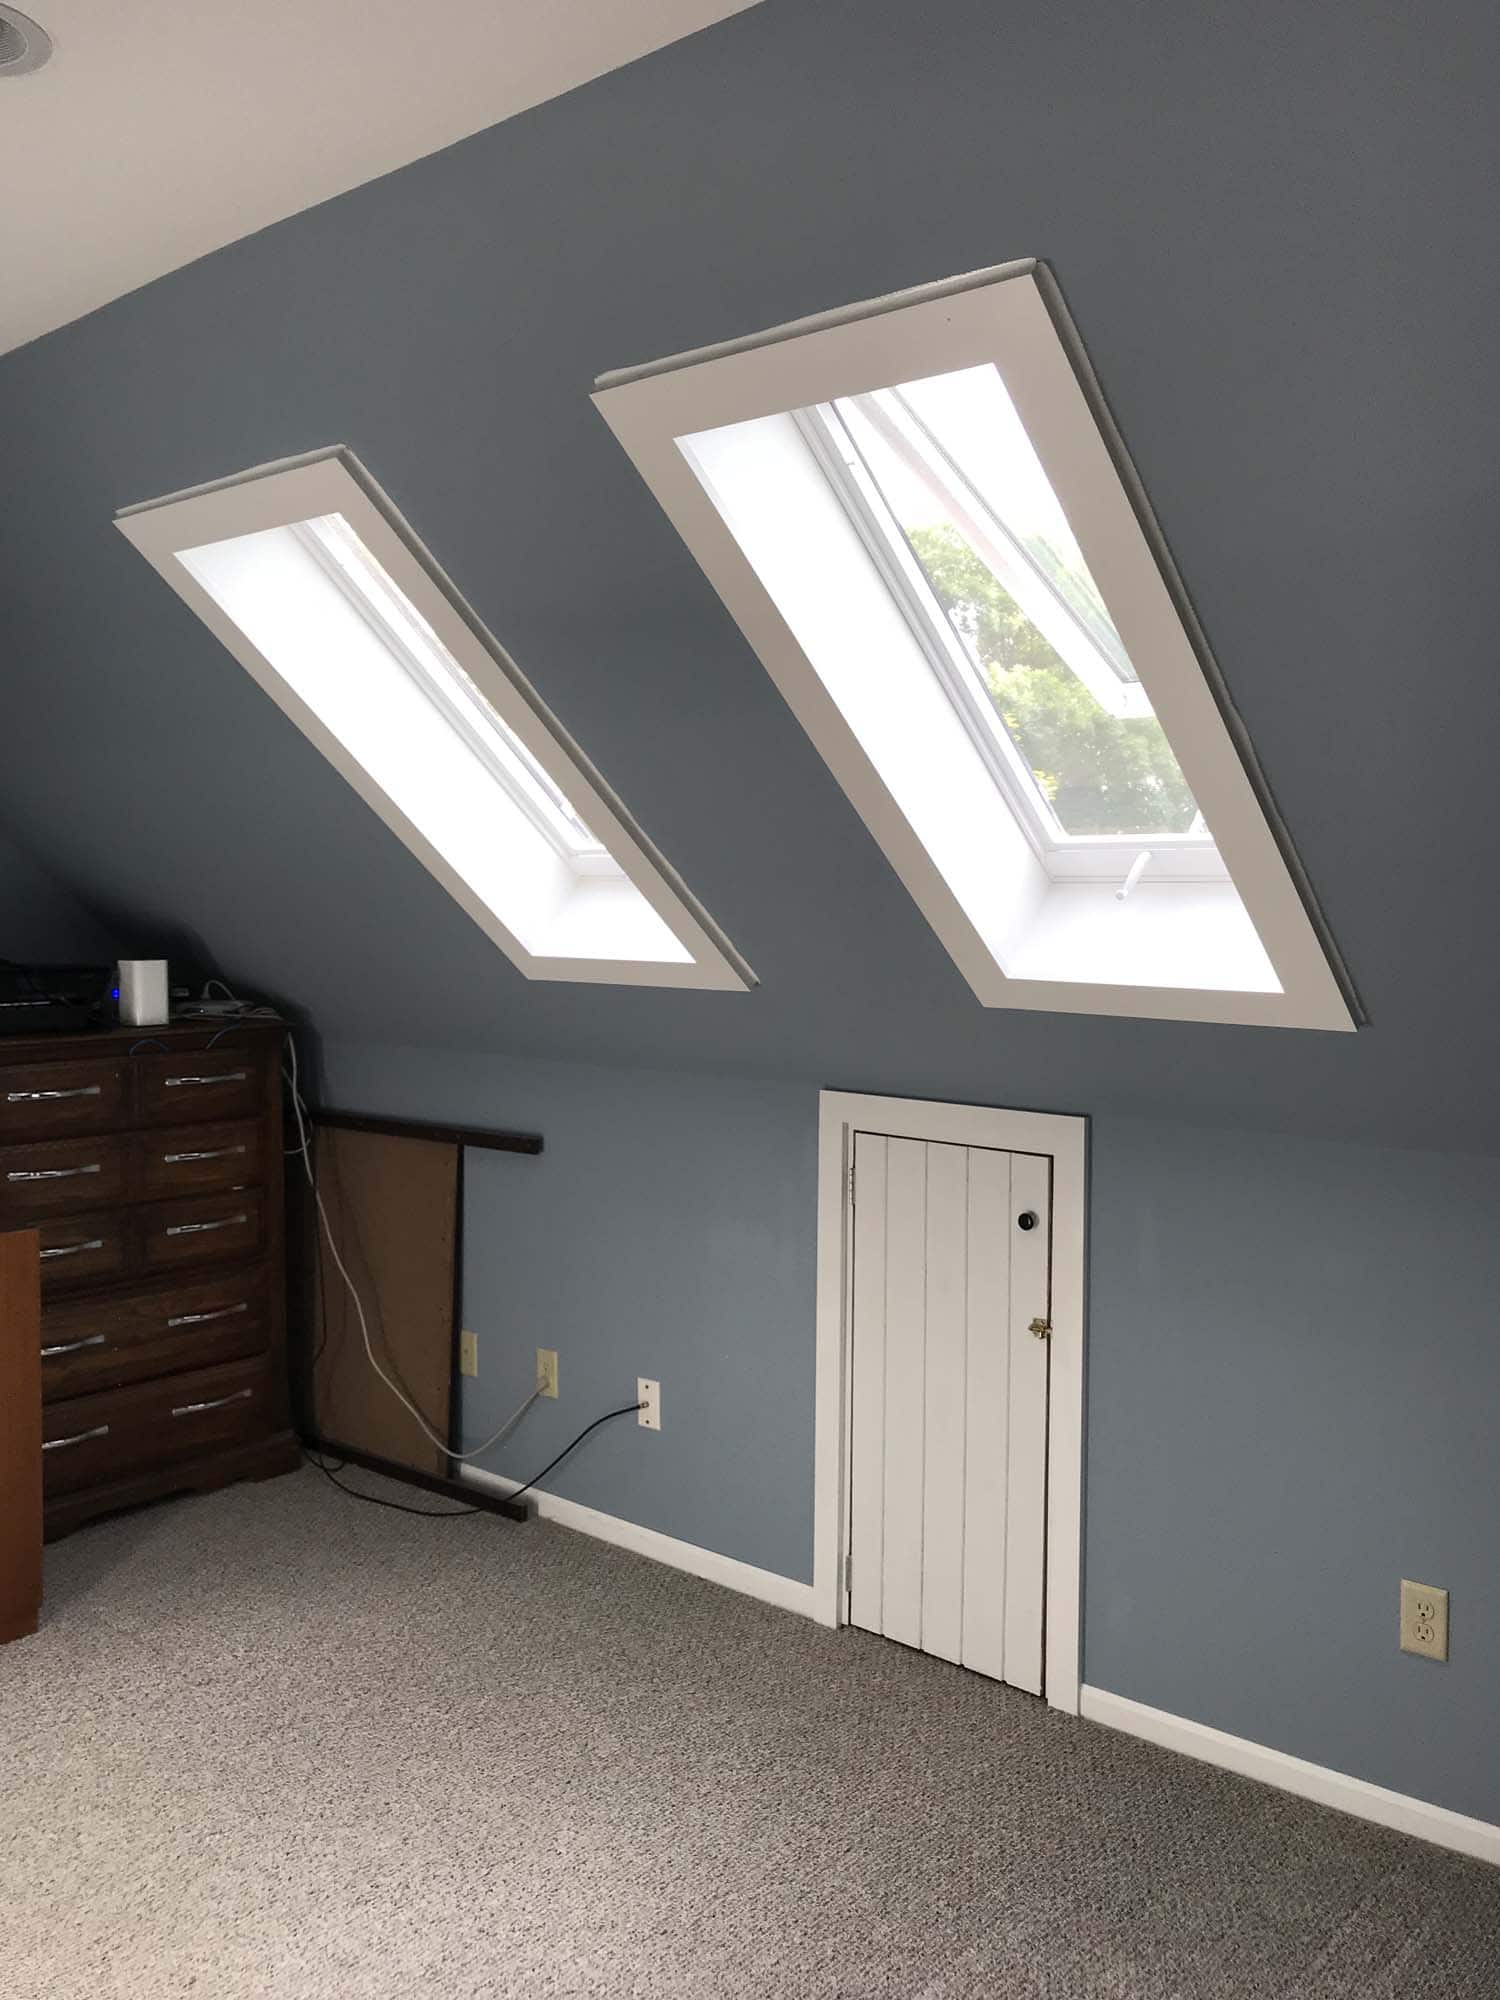 Two rectangular skylights looking in on a light blue room